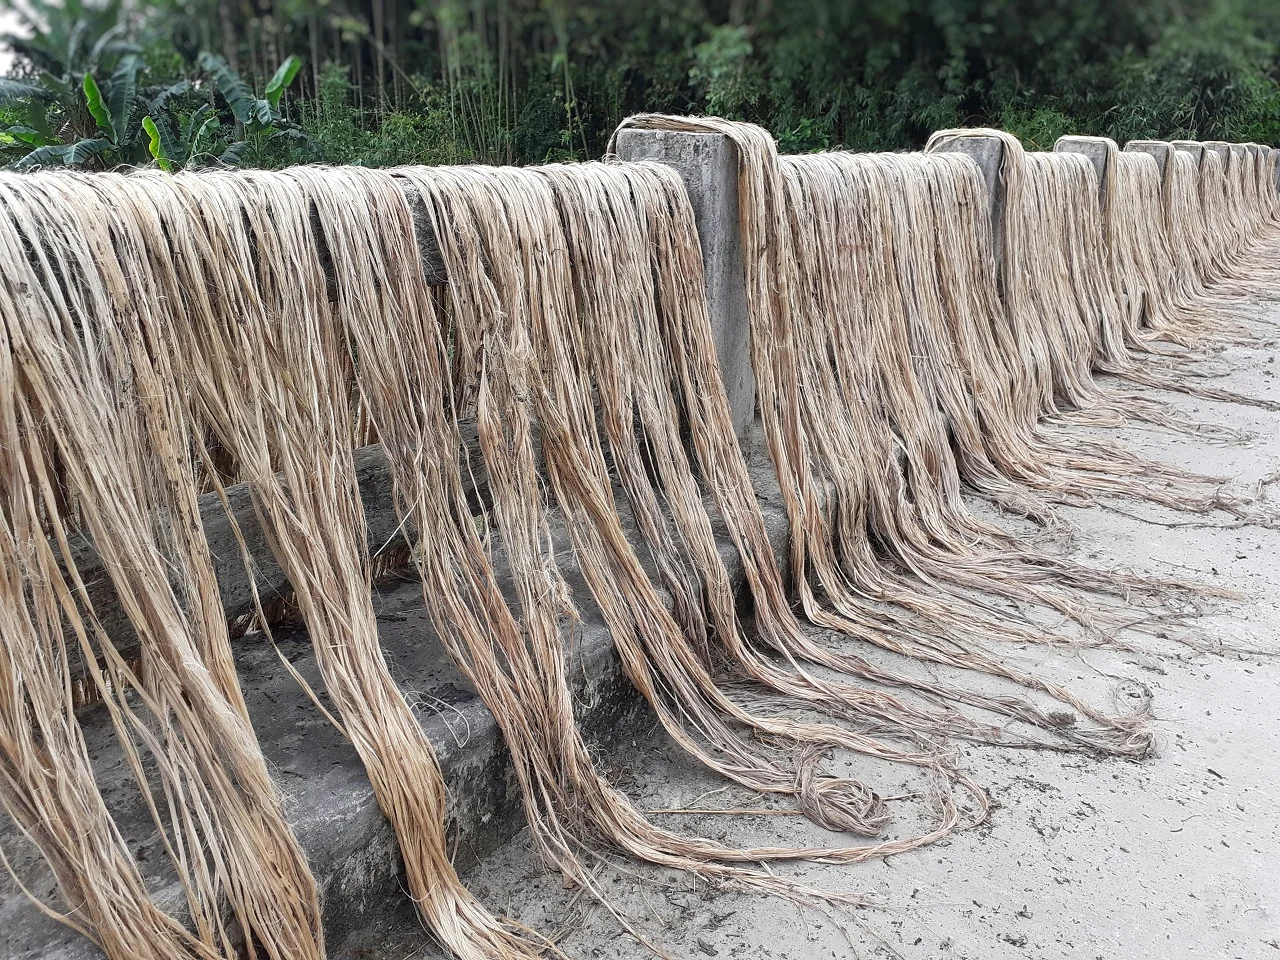 Raw jute fiber hanging on the bridge, under the sun for drying. Jute cultivation in Assam, India